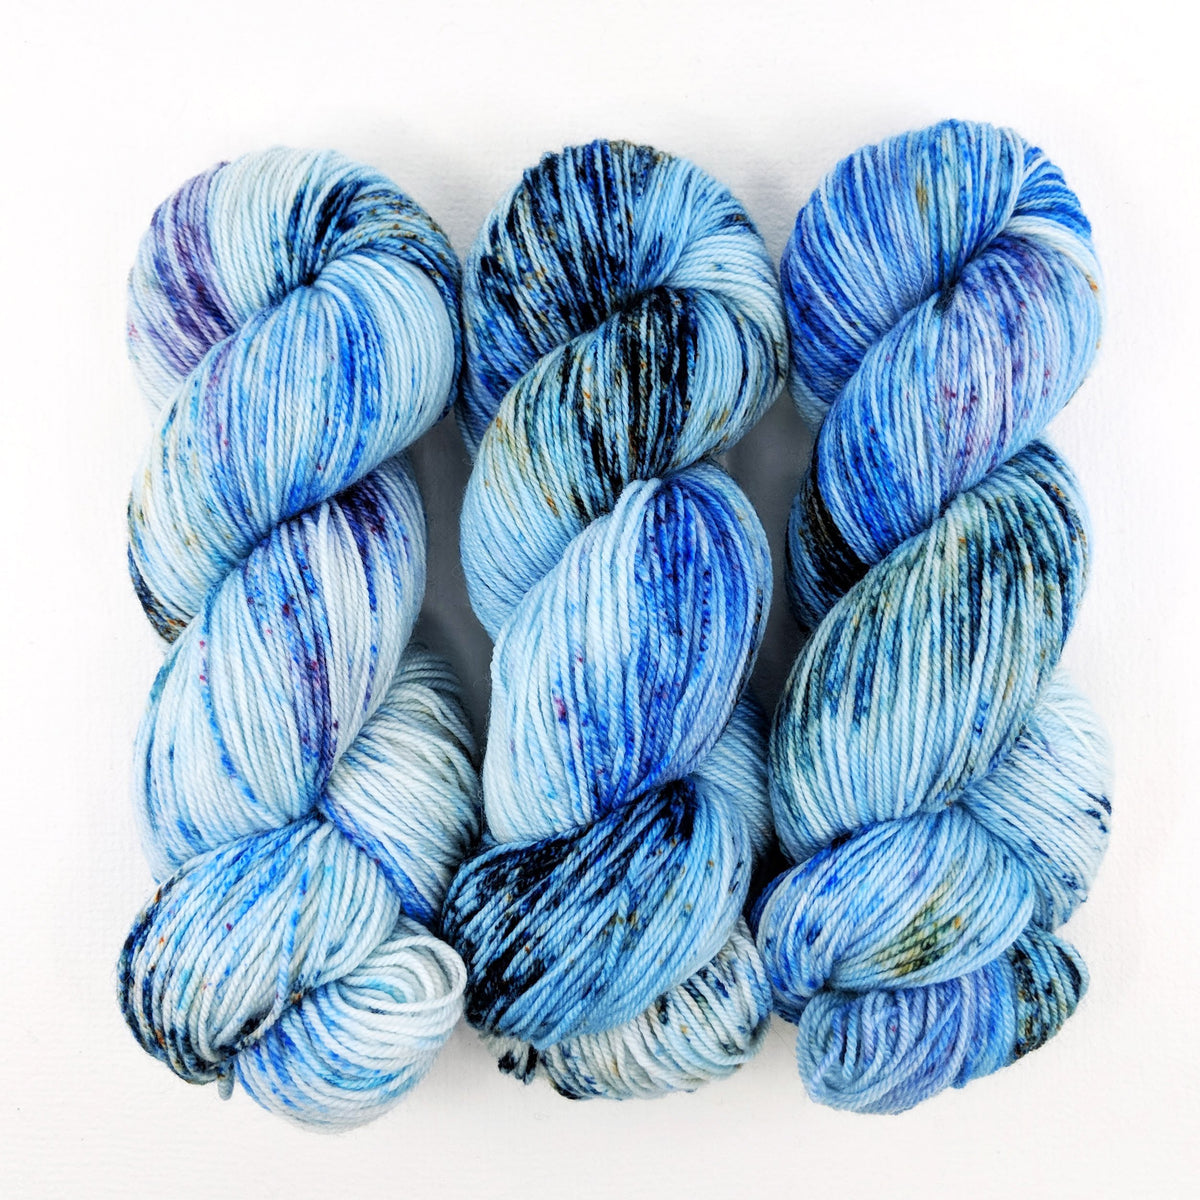 Picasso in Blue - Merino DK / Light Worsted - Dyed Stock